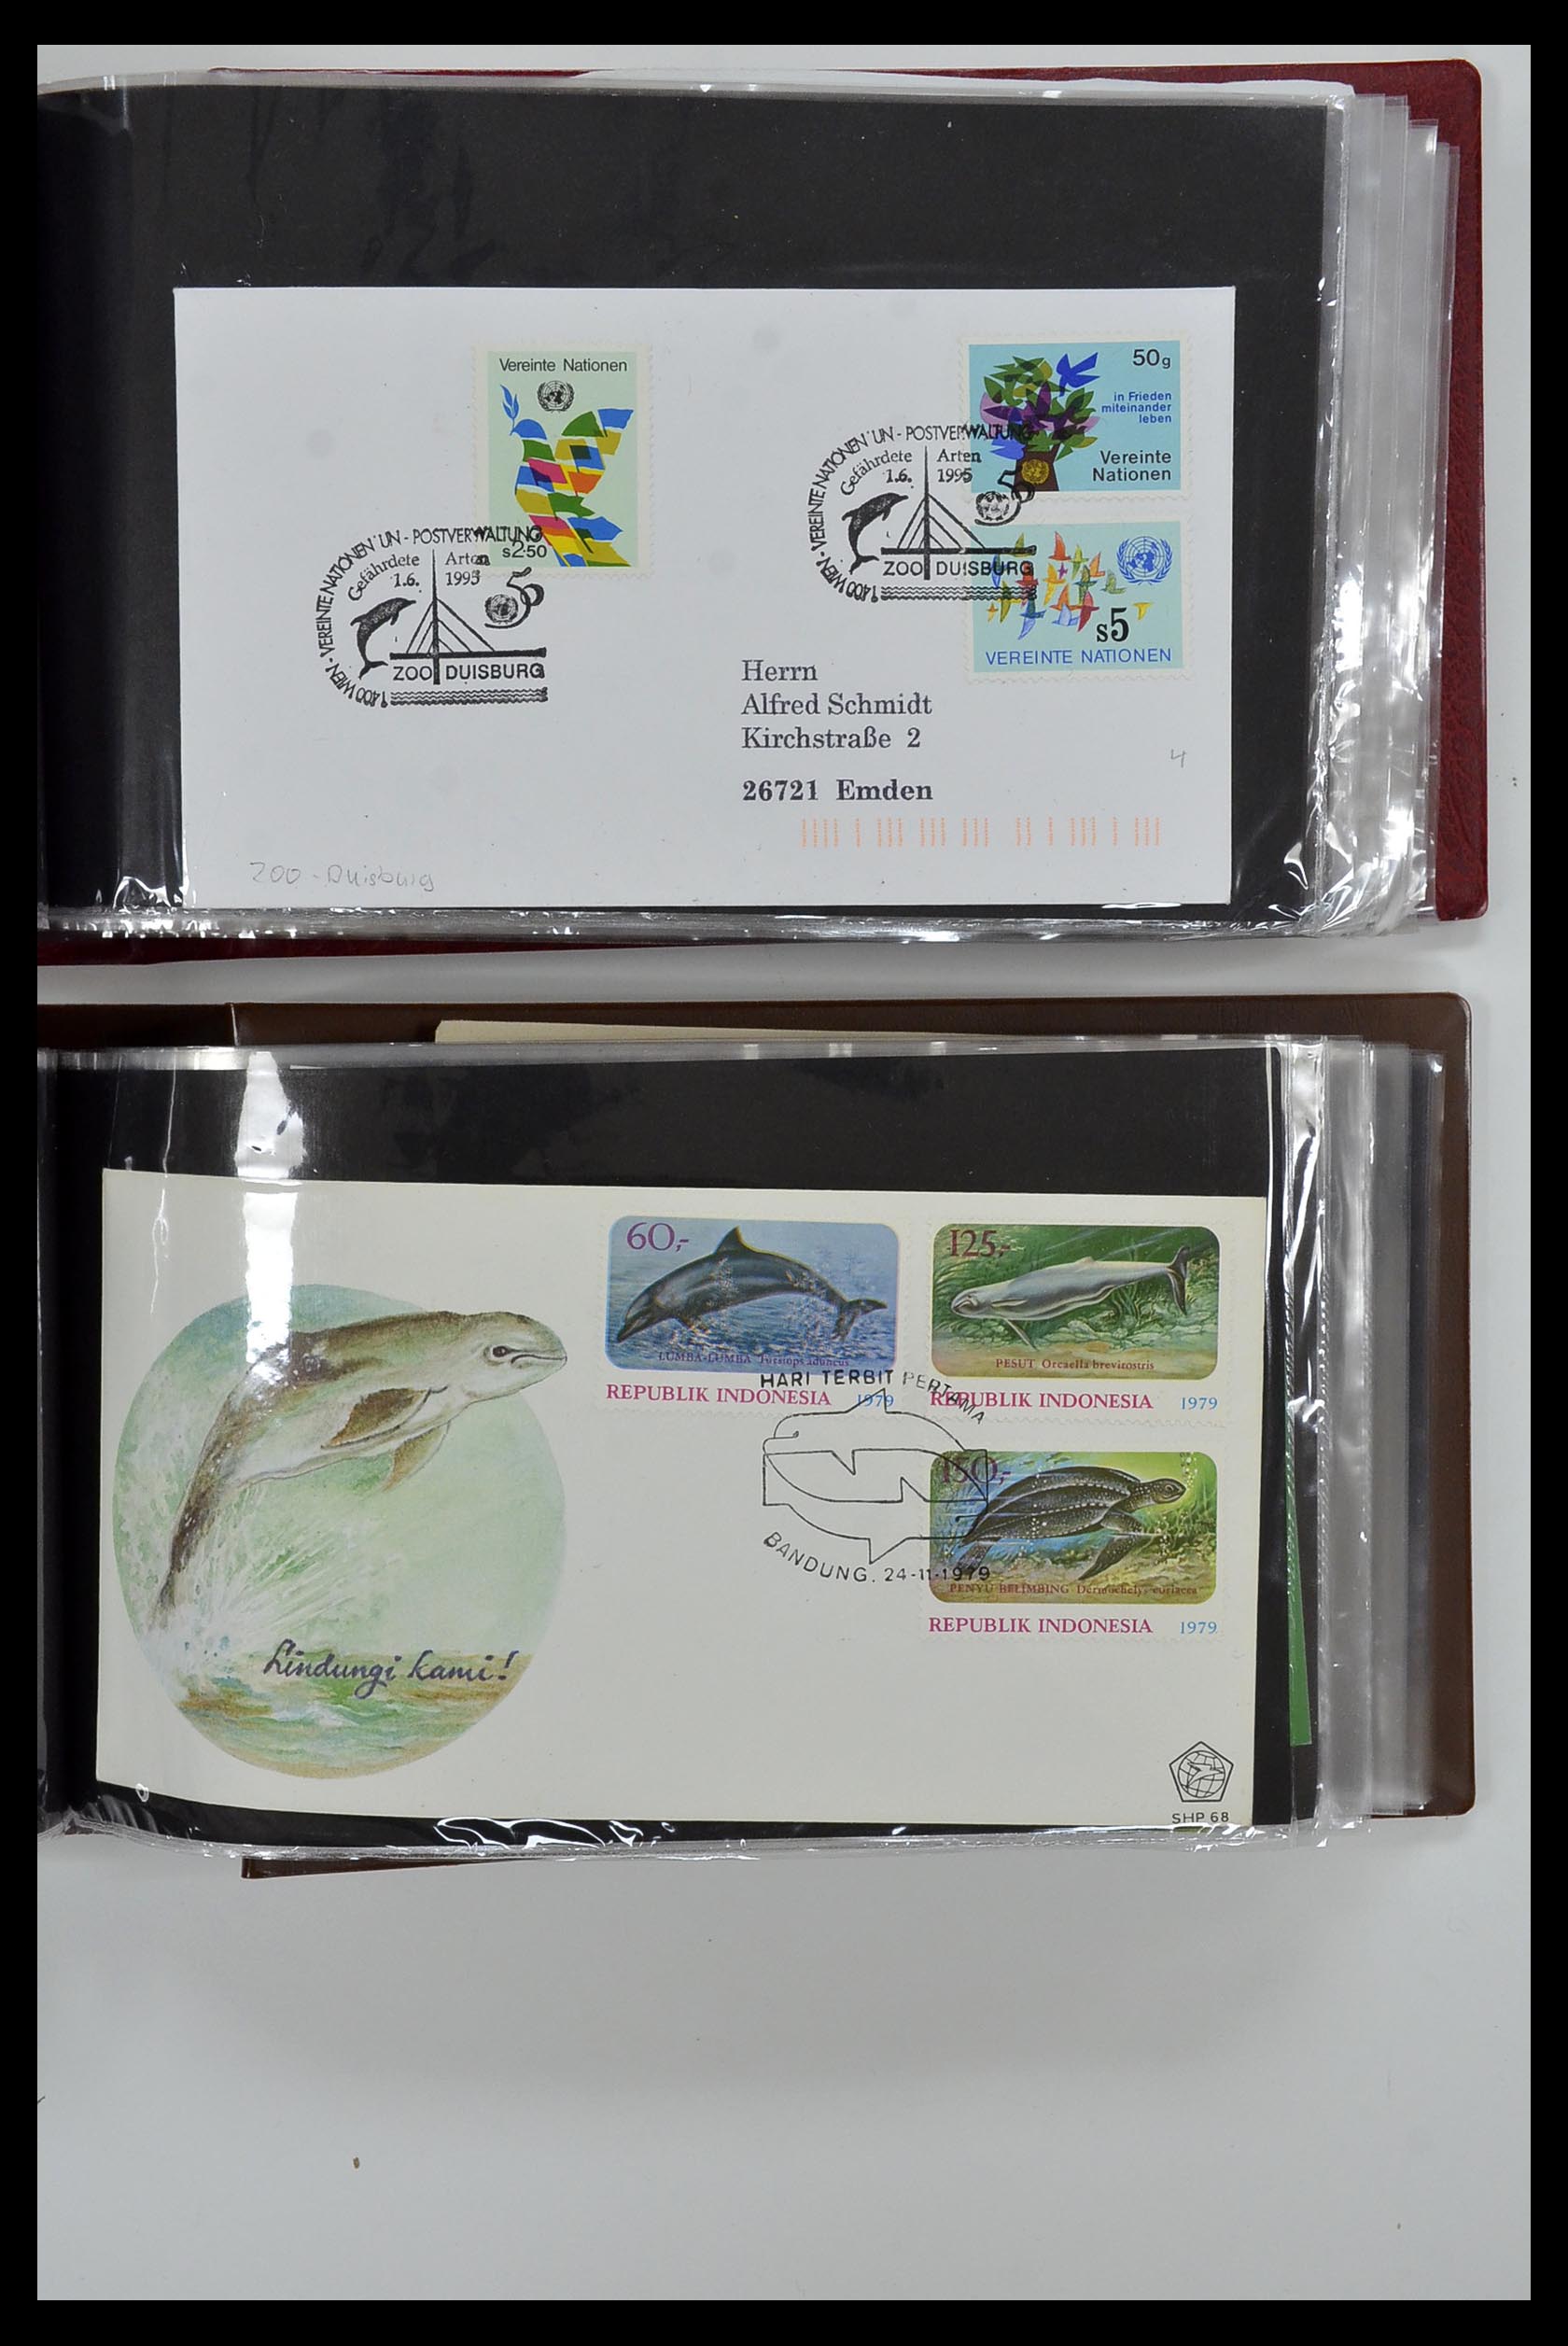 35076 848 - Stamp Collection 35076 Thematics fishes covers 1912-2000.